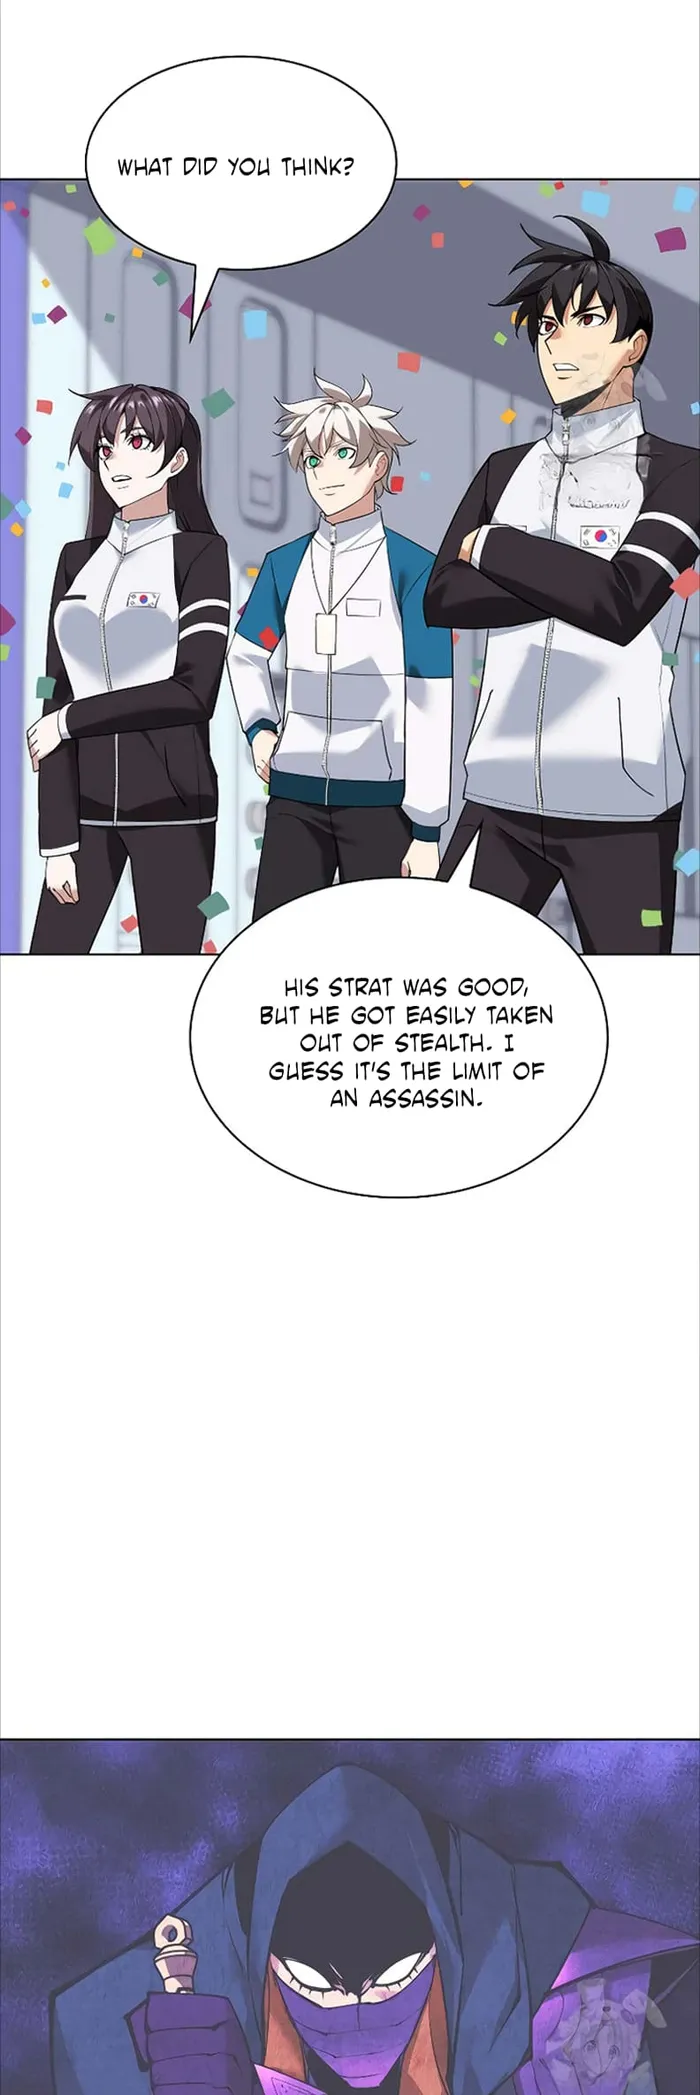 Let's Read Overgeared - Chapter 224 Manga Manhwa Comic toon Online Everyday English Translation on Reaper Scan